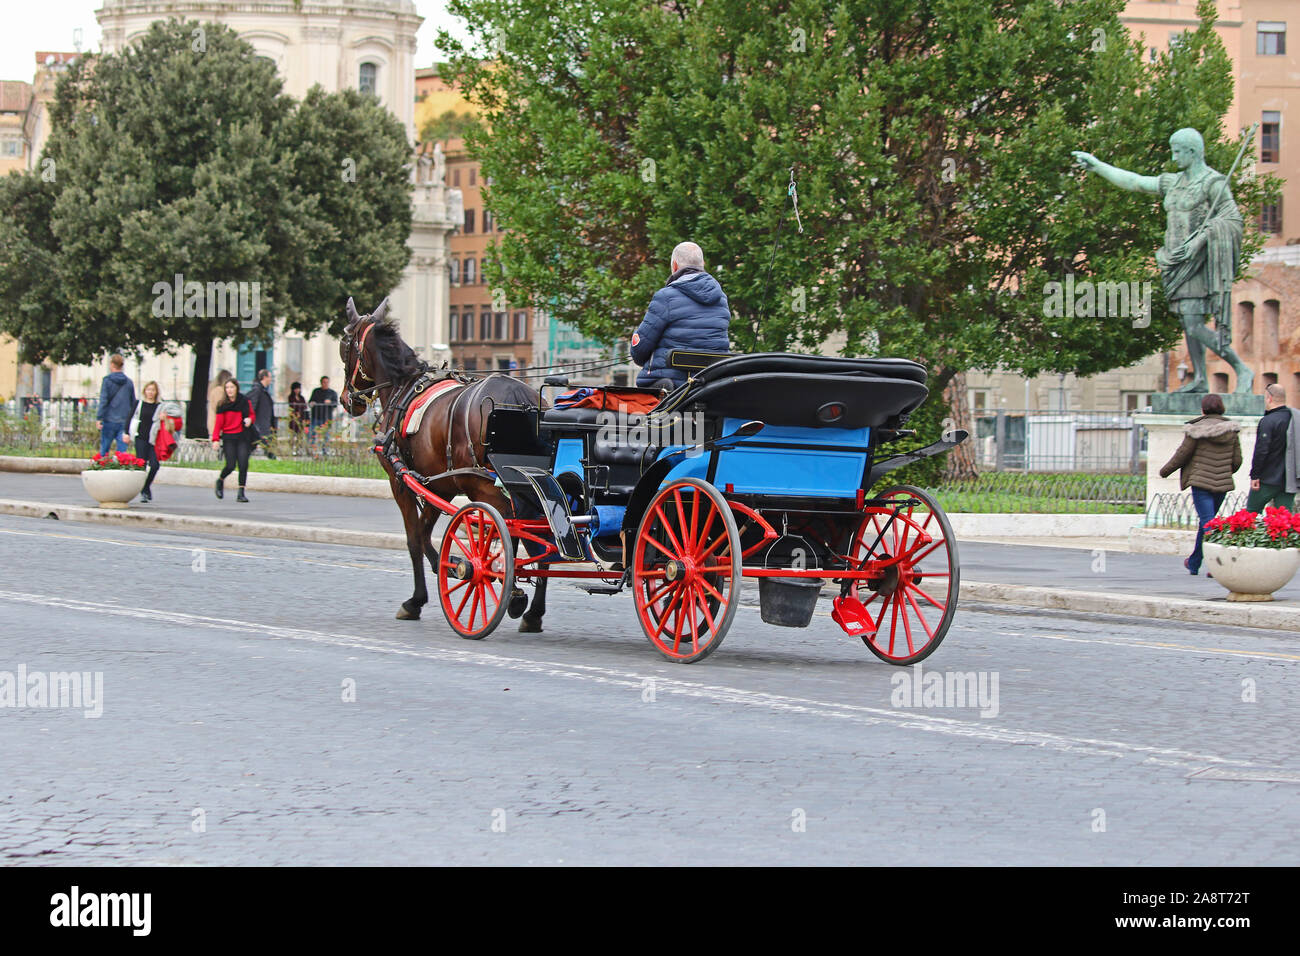 a street in Rome with ancient and modern Rome and a horse and cart used to give tourists a ride Stock Photo